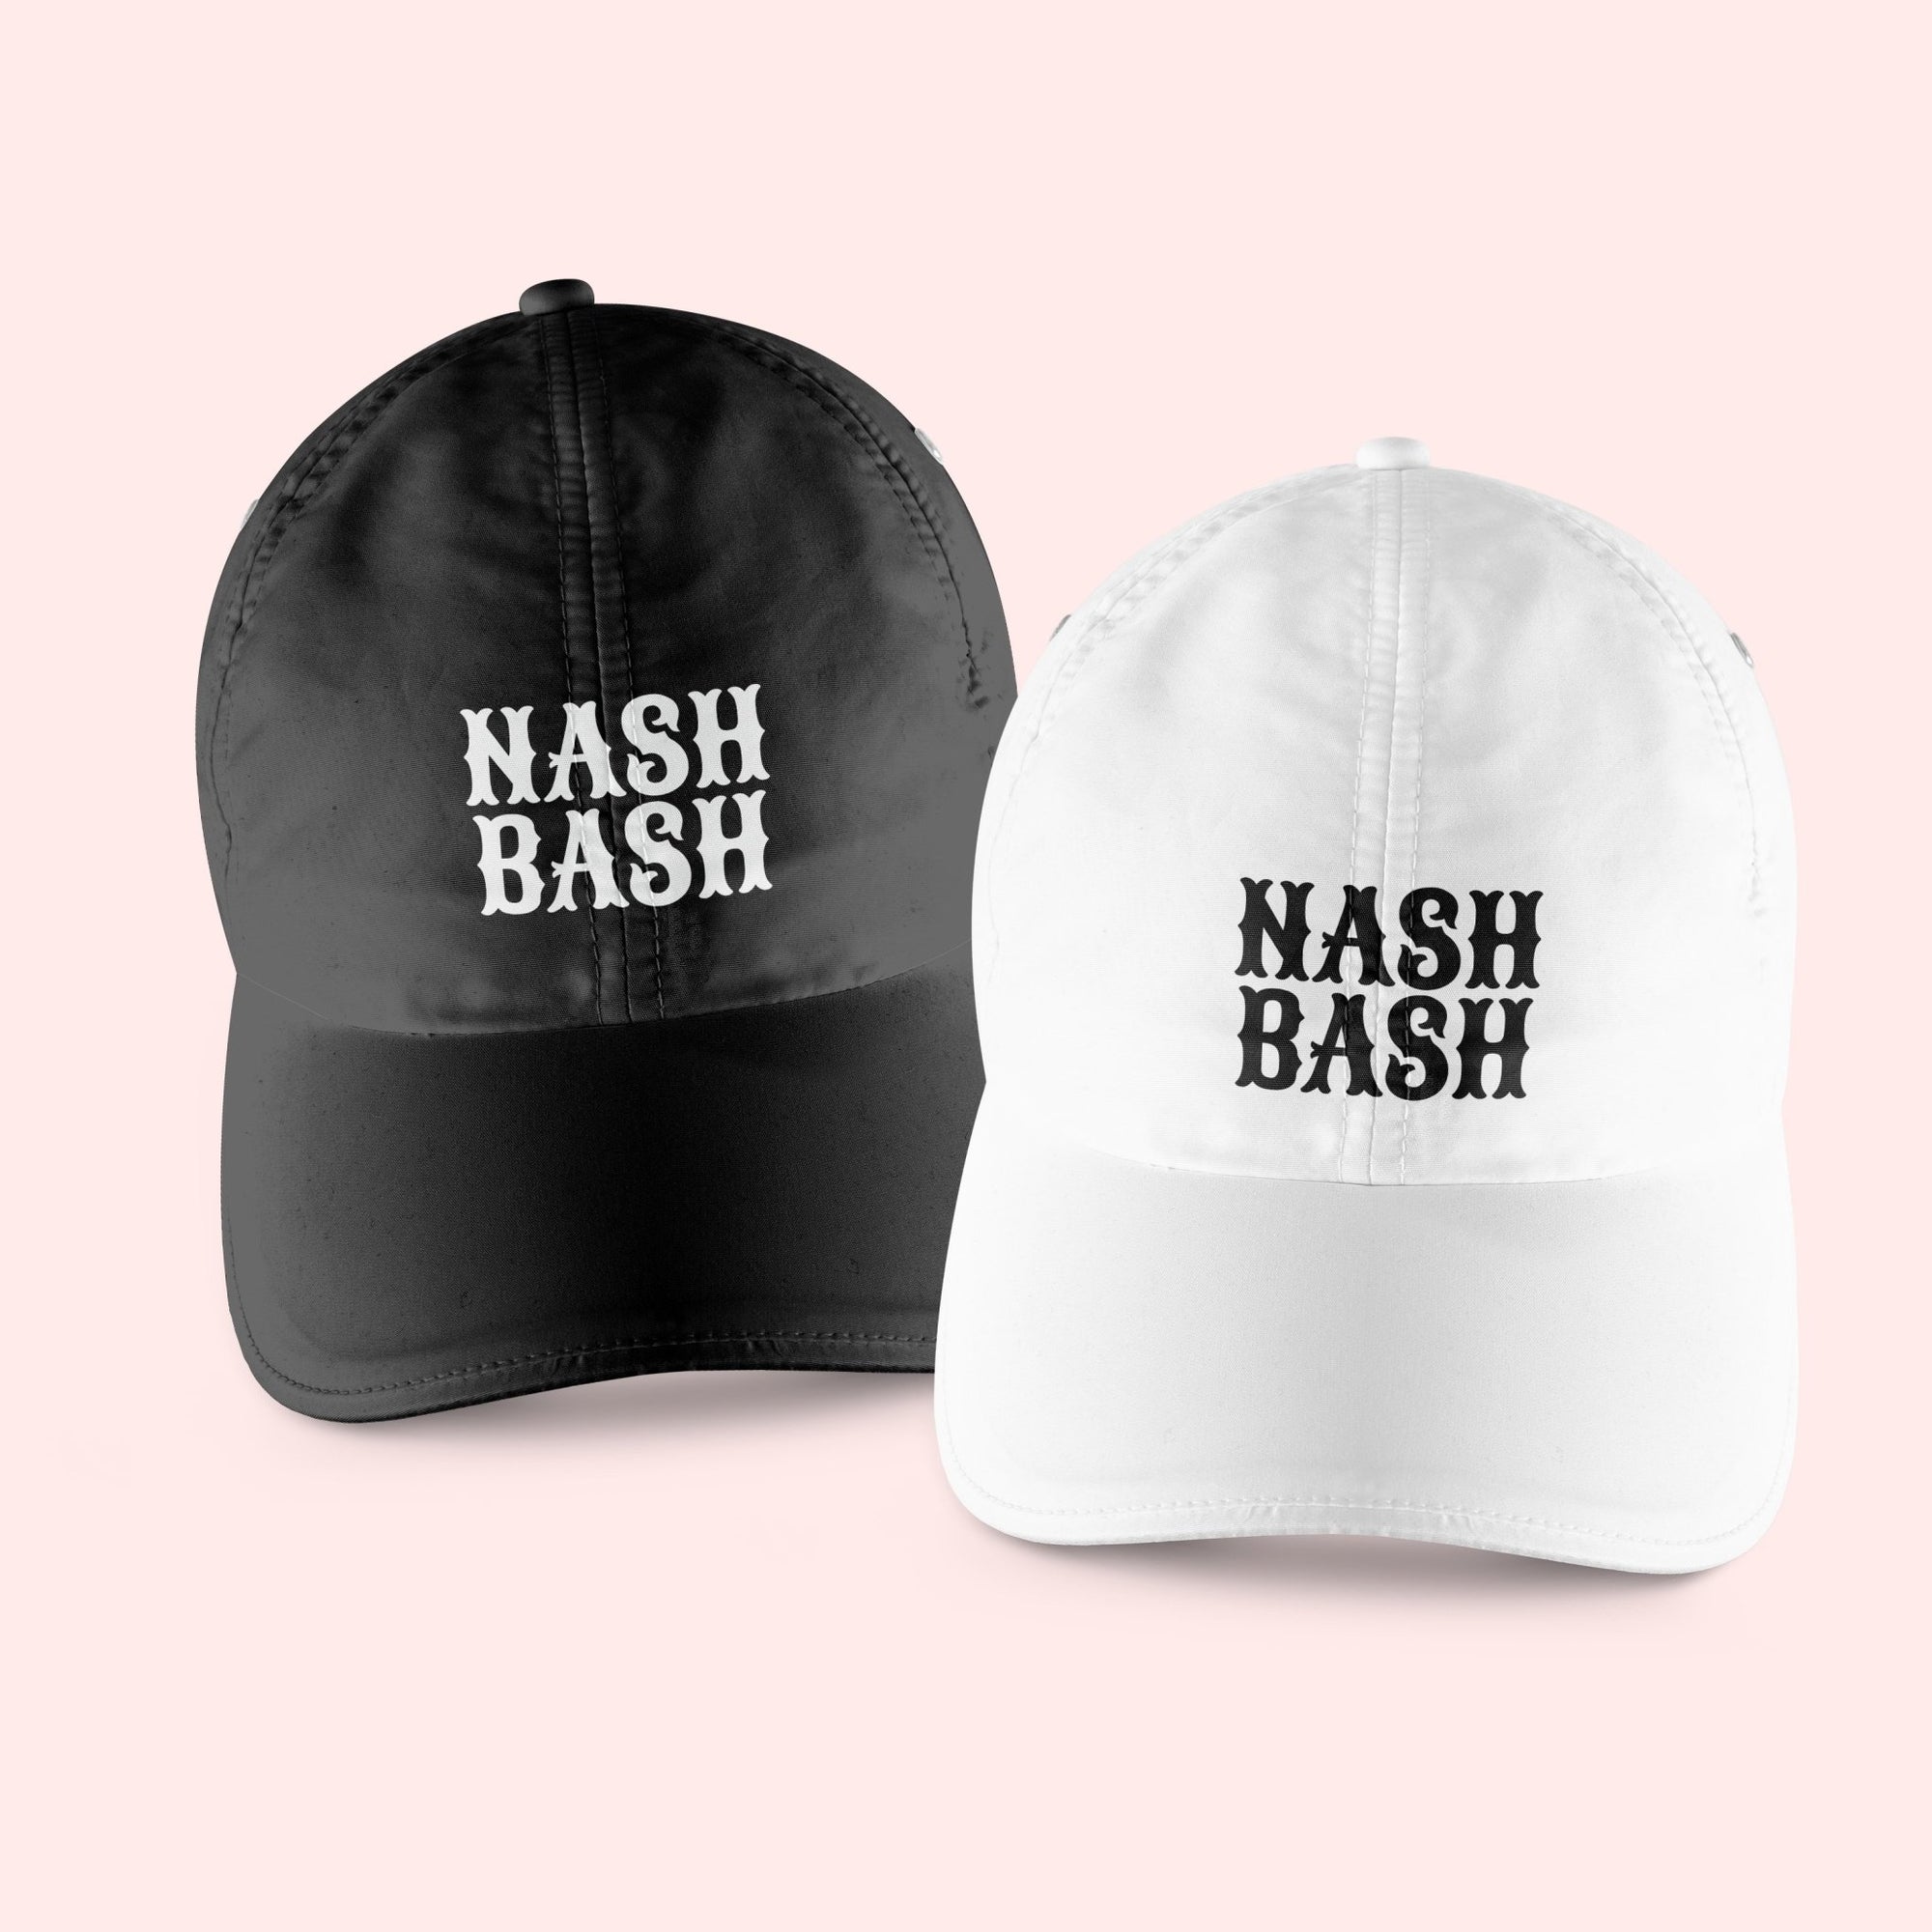 A black and white baseball hat read "Nash Bash" in black and white fonts.